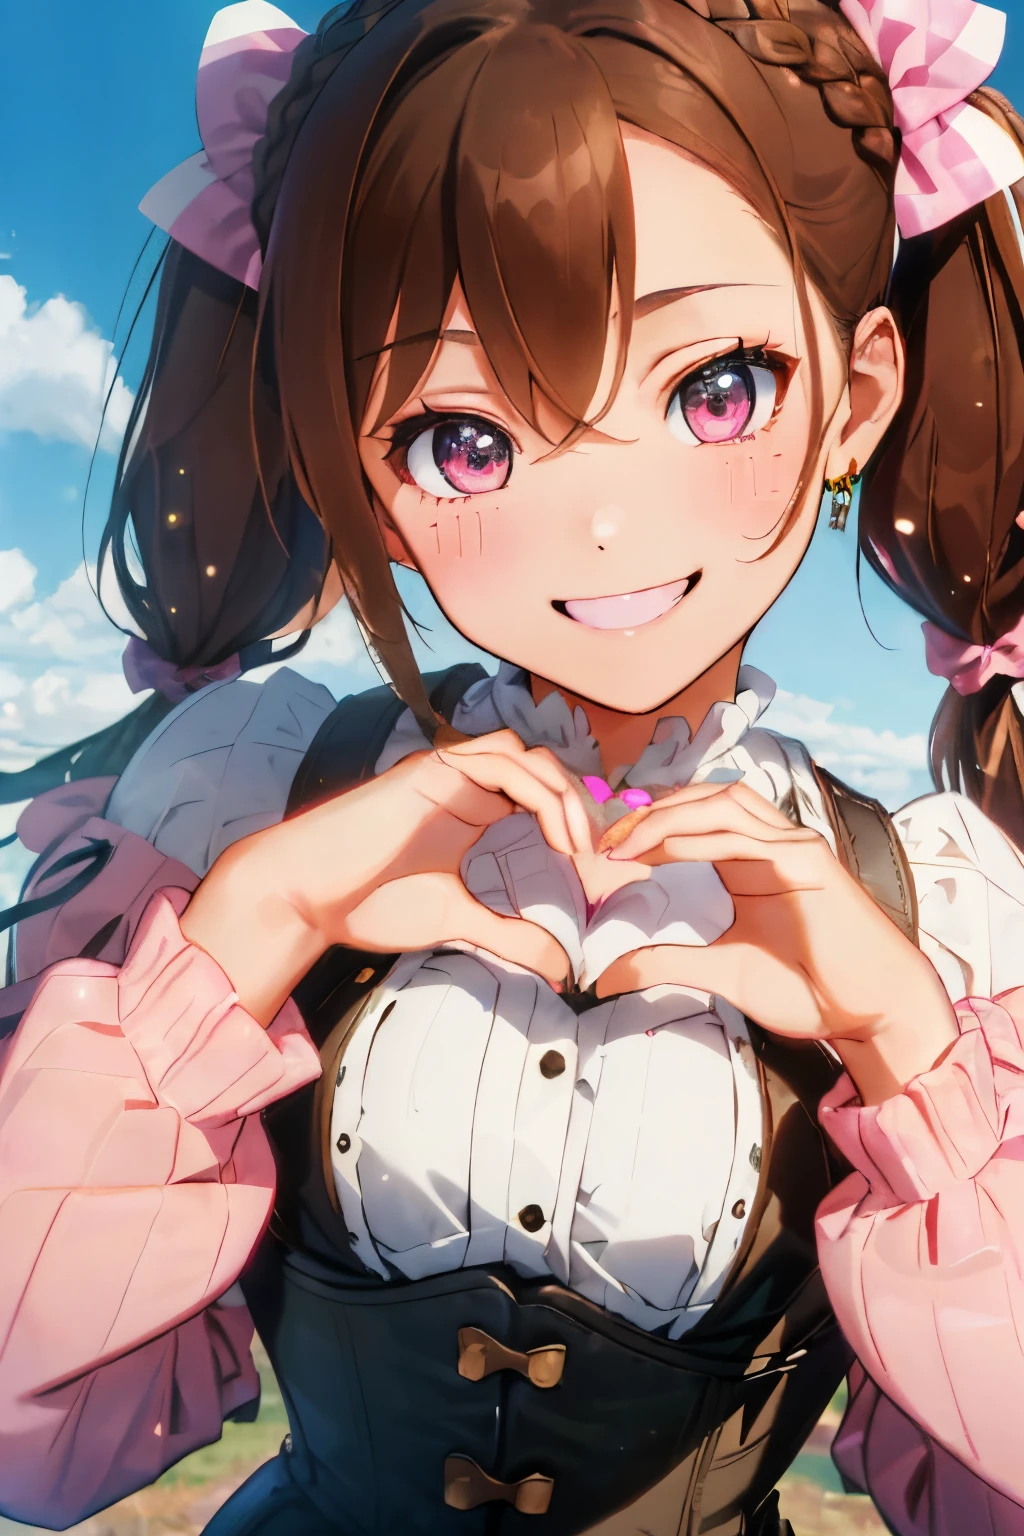 ((Brown hair)),((Braided shorthair)),((Brown eyes)),((Pigtails)),((With bangs)),Smiling smile,(Winter clothes),((Long sleeves with open shoulders and puff sleeves)),((corsets)),(Striped clothing),((pink there,Green grass,amarelo,blanche)),(((Smile while winking))),((He is posing with his hands in the shape of a heart...)),(Flying Heart Mark),((Colorful and pop world view)),((close up of face)),(((eyes close up))),